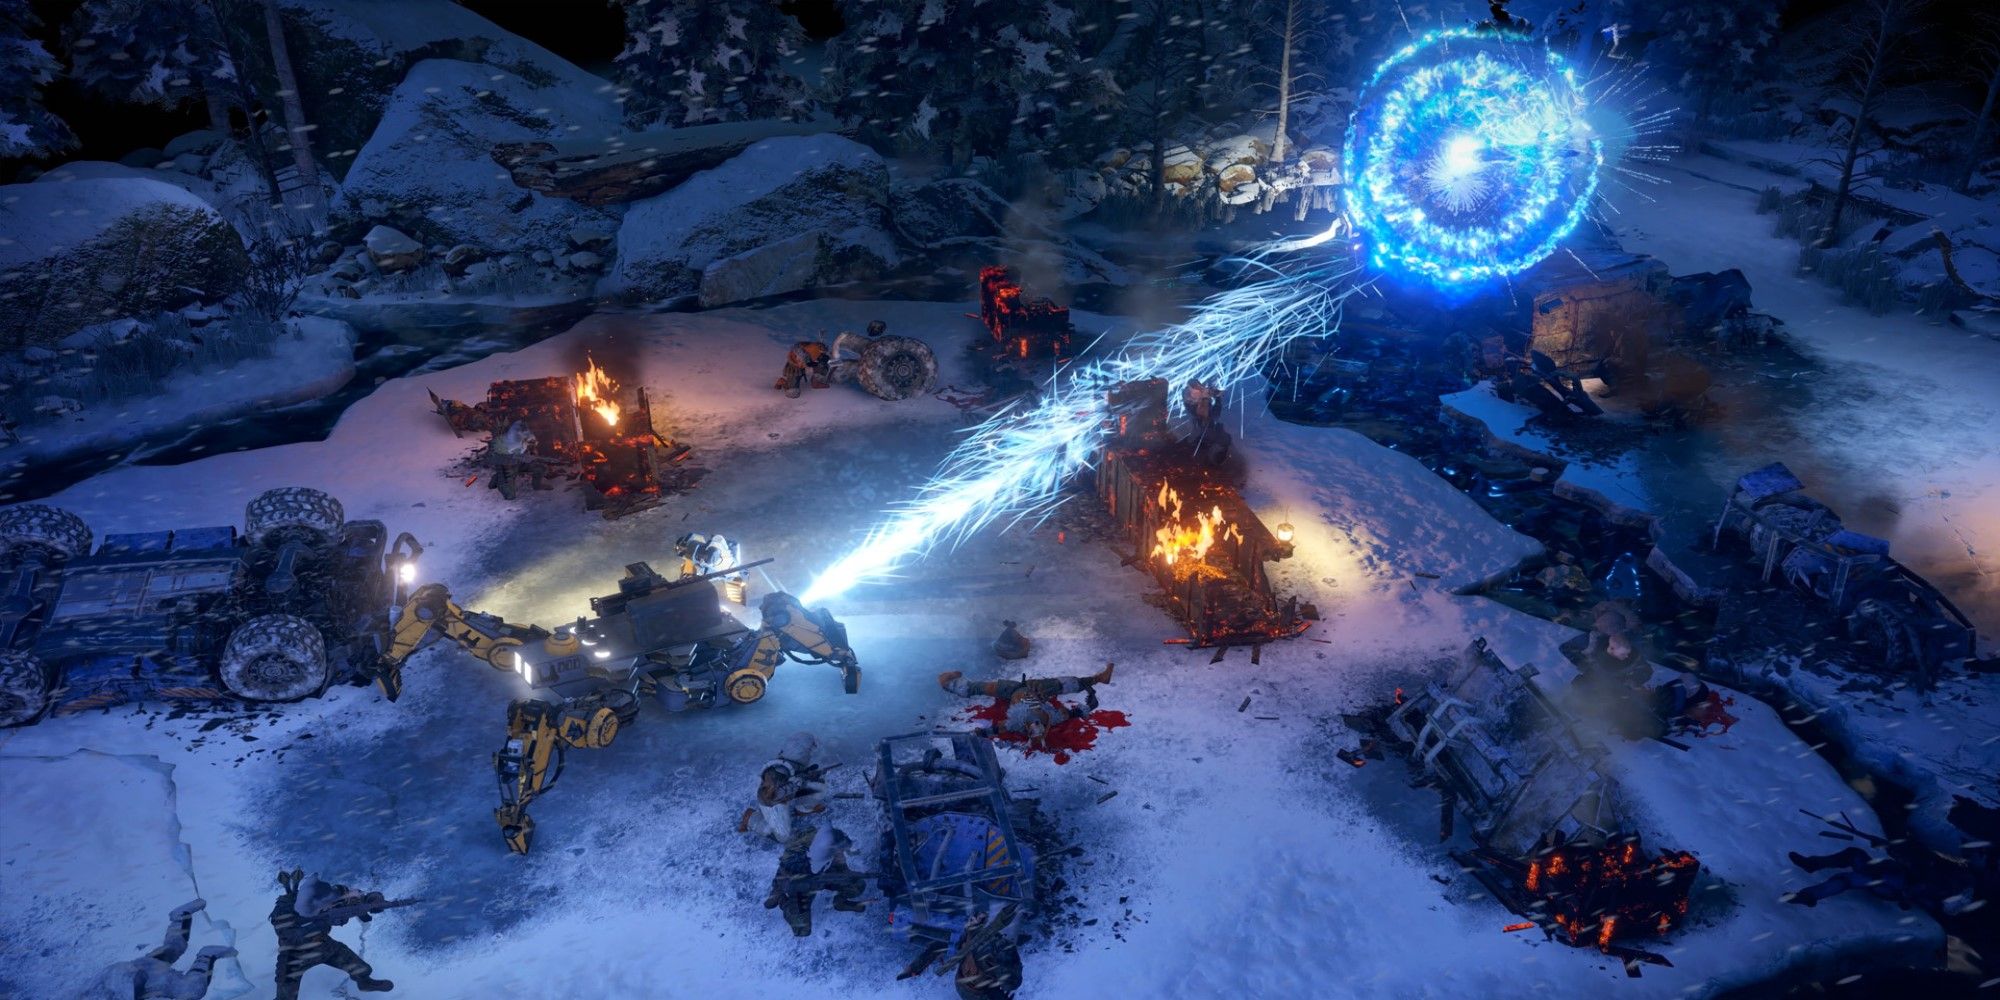 Gameplay from Wasteland 3